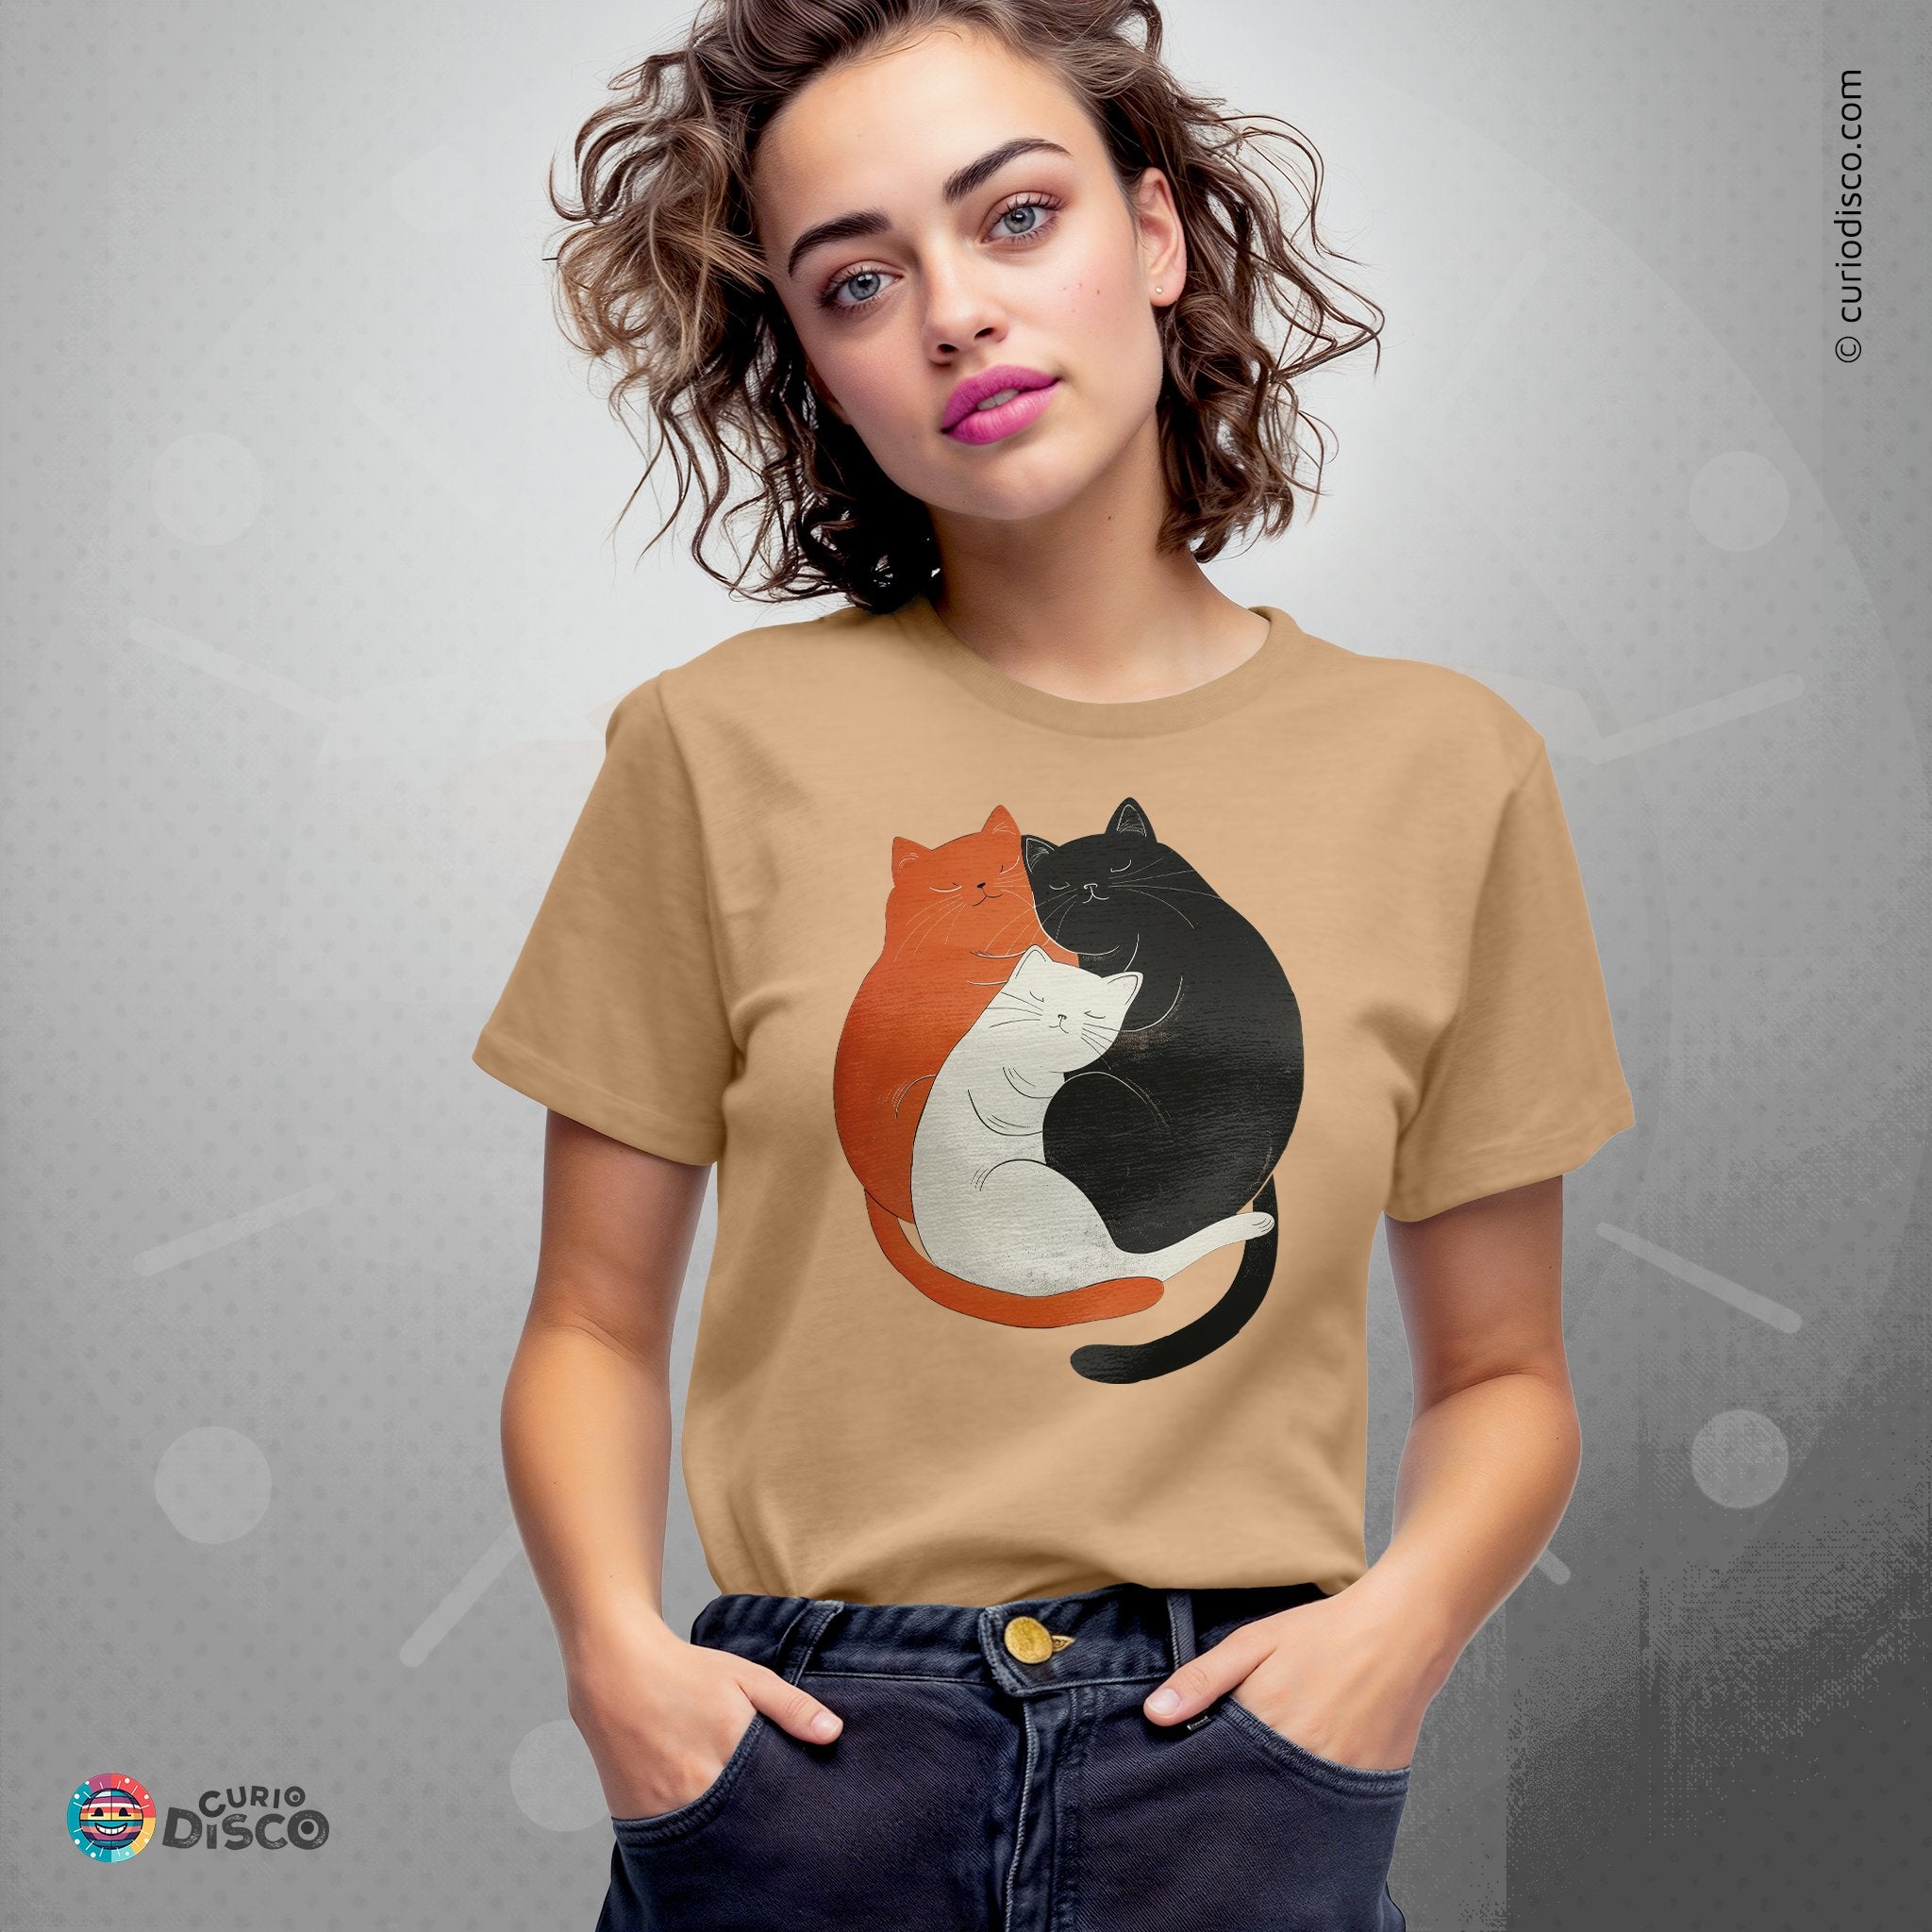 Cat tshirt featuring yin yang calico cat, ideal as cat mom gifts, funny cat shirt, gifts for cat lovers, cat shirts for women. Perfect plus size yoga shirt and gym shirt, trendy yoga gifts, aesthetic clothes, popular right now.